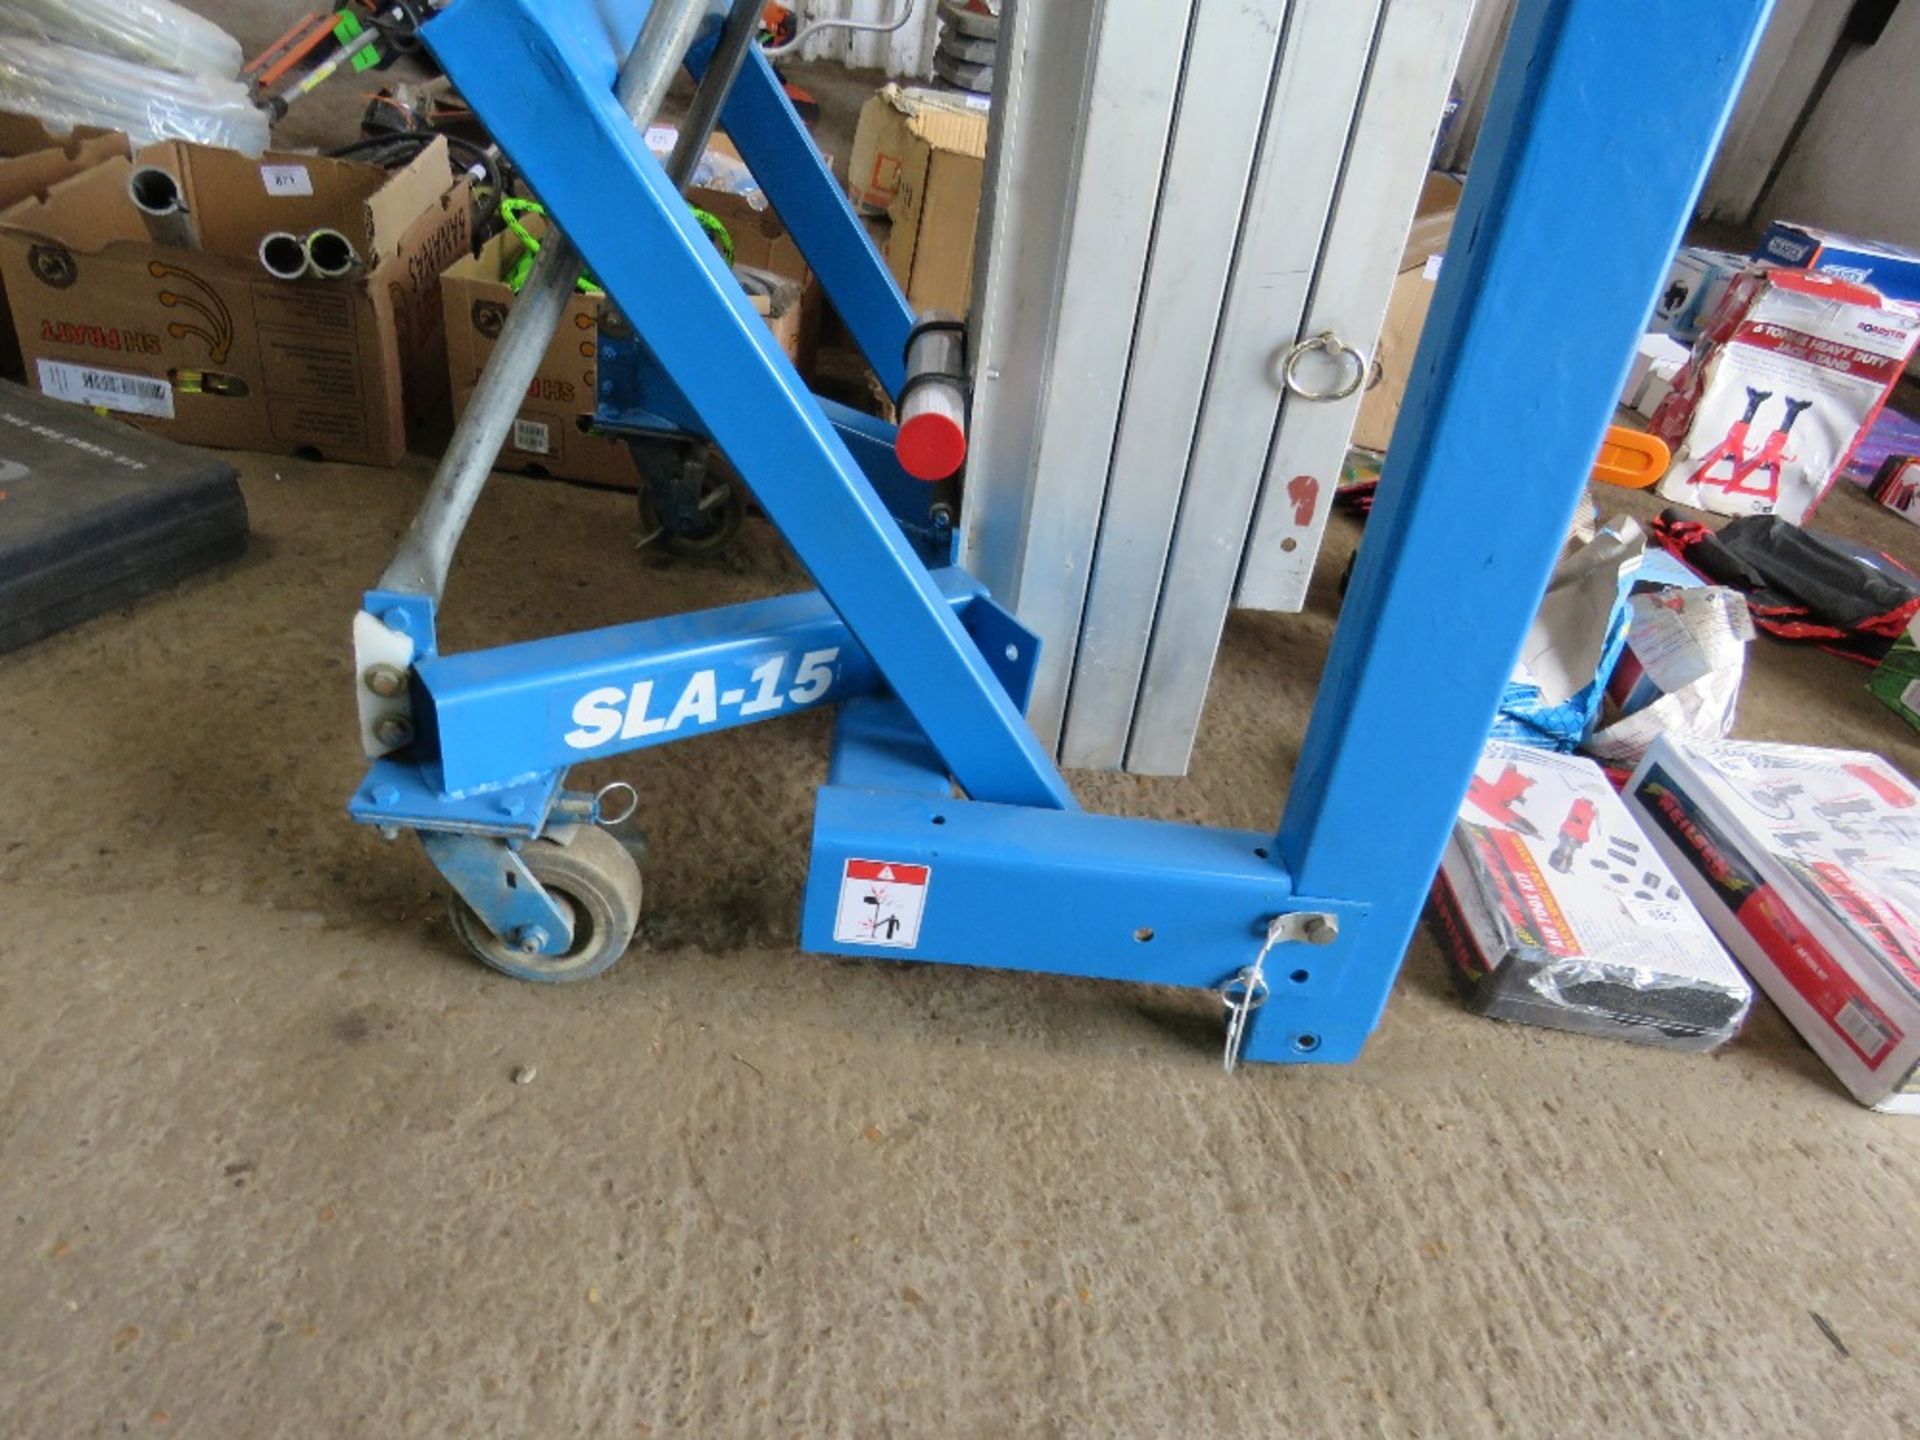 GENIE SLA15 MATERIAL LIFT. DIRECT FROM LOCAL COMPANY DUE TO DEPOT CLOSURE. - Image 2 of 2